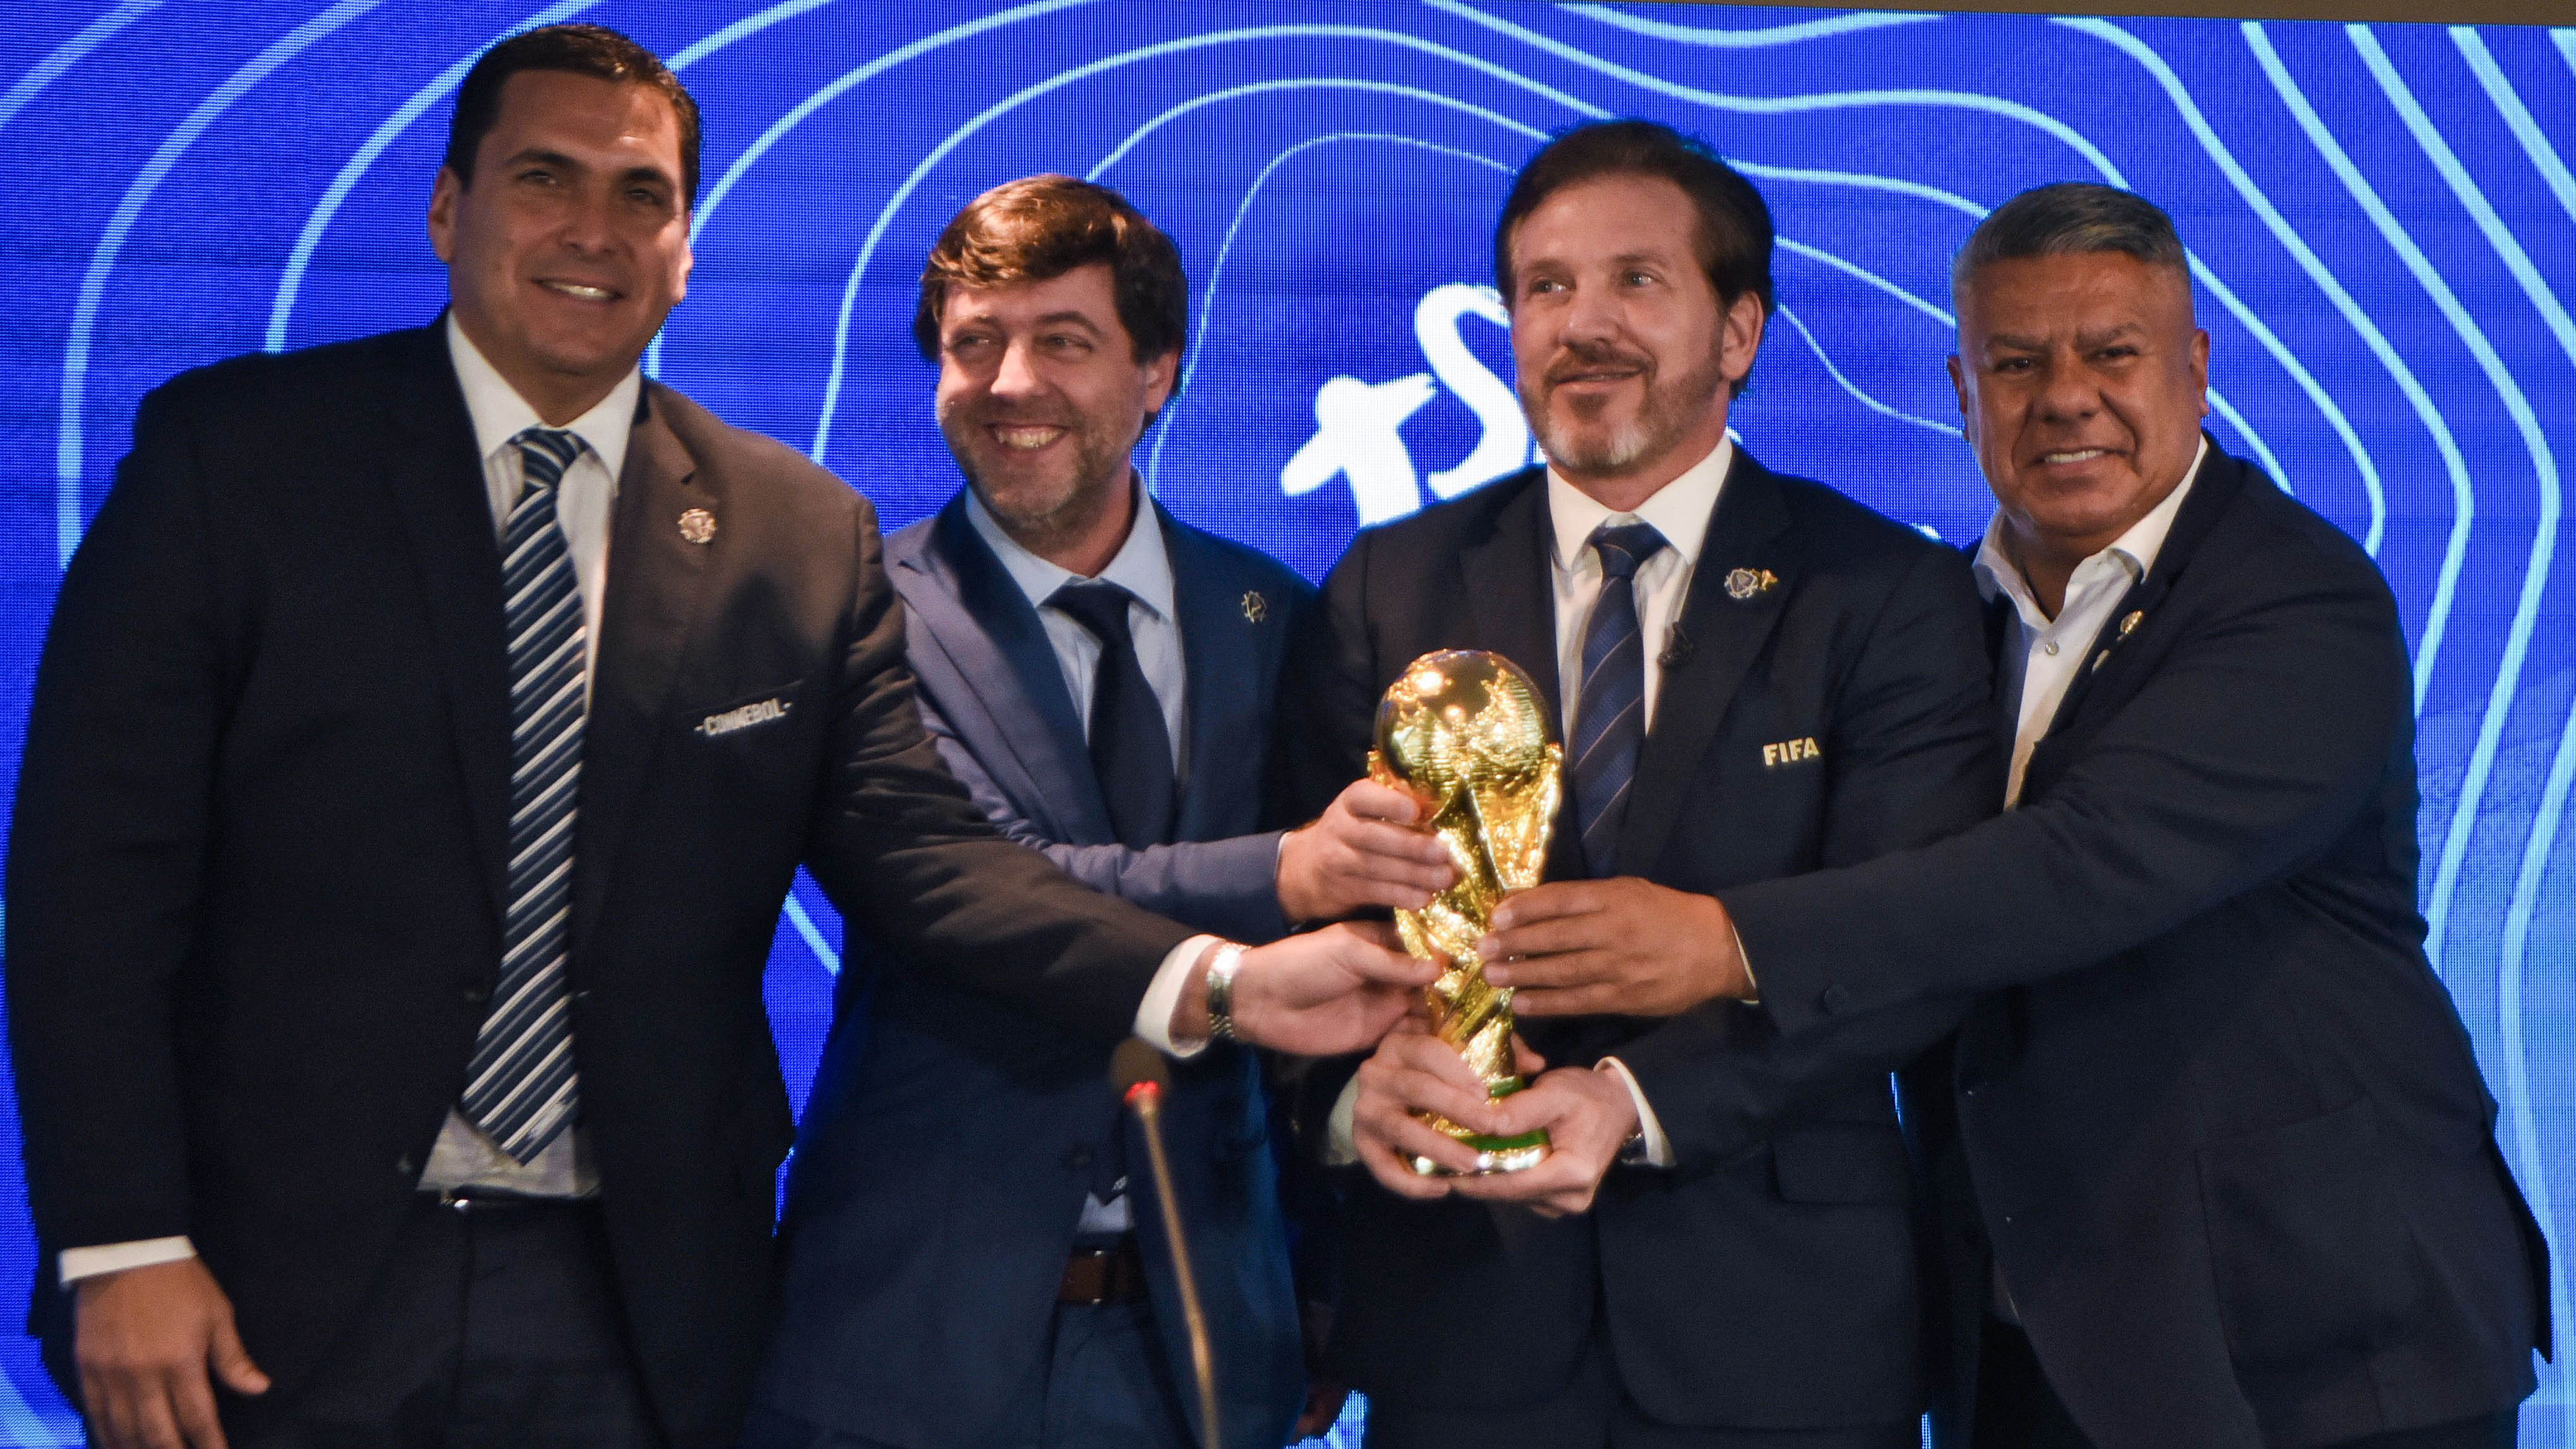 FIFA 2030 World Cup to feature games on 3 continents